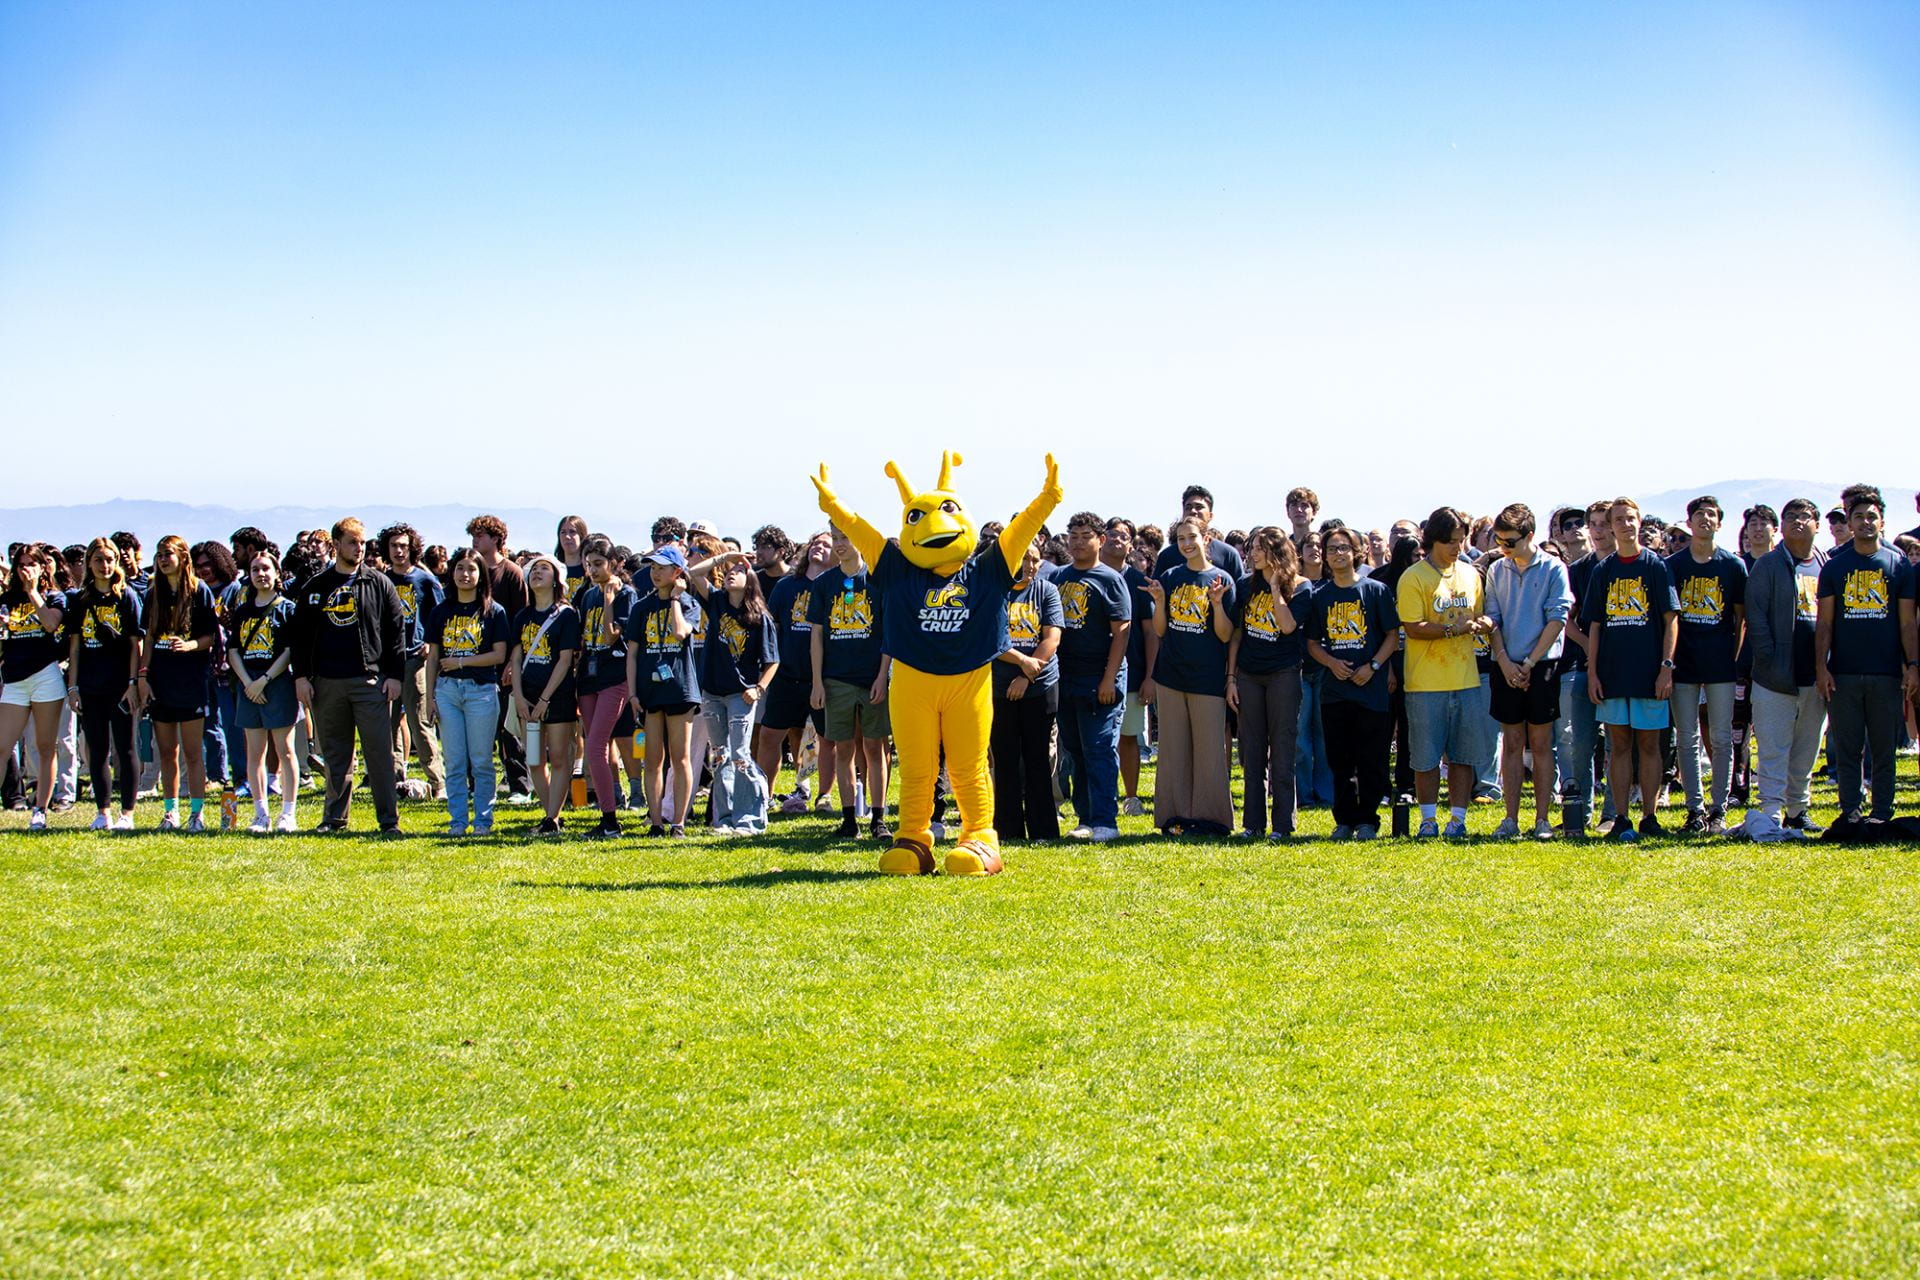 big group of students posing for a photo with the campus mascot, Sammy the Slug